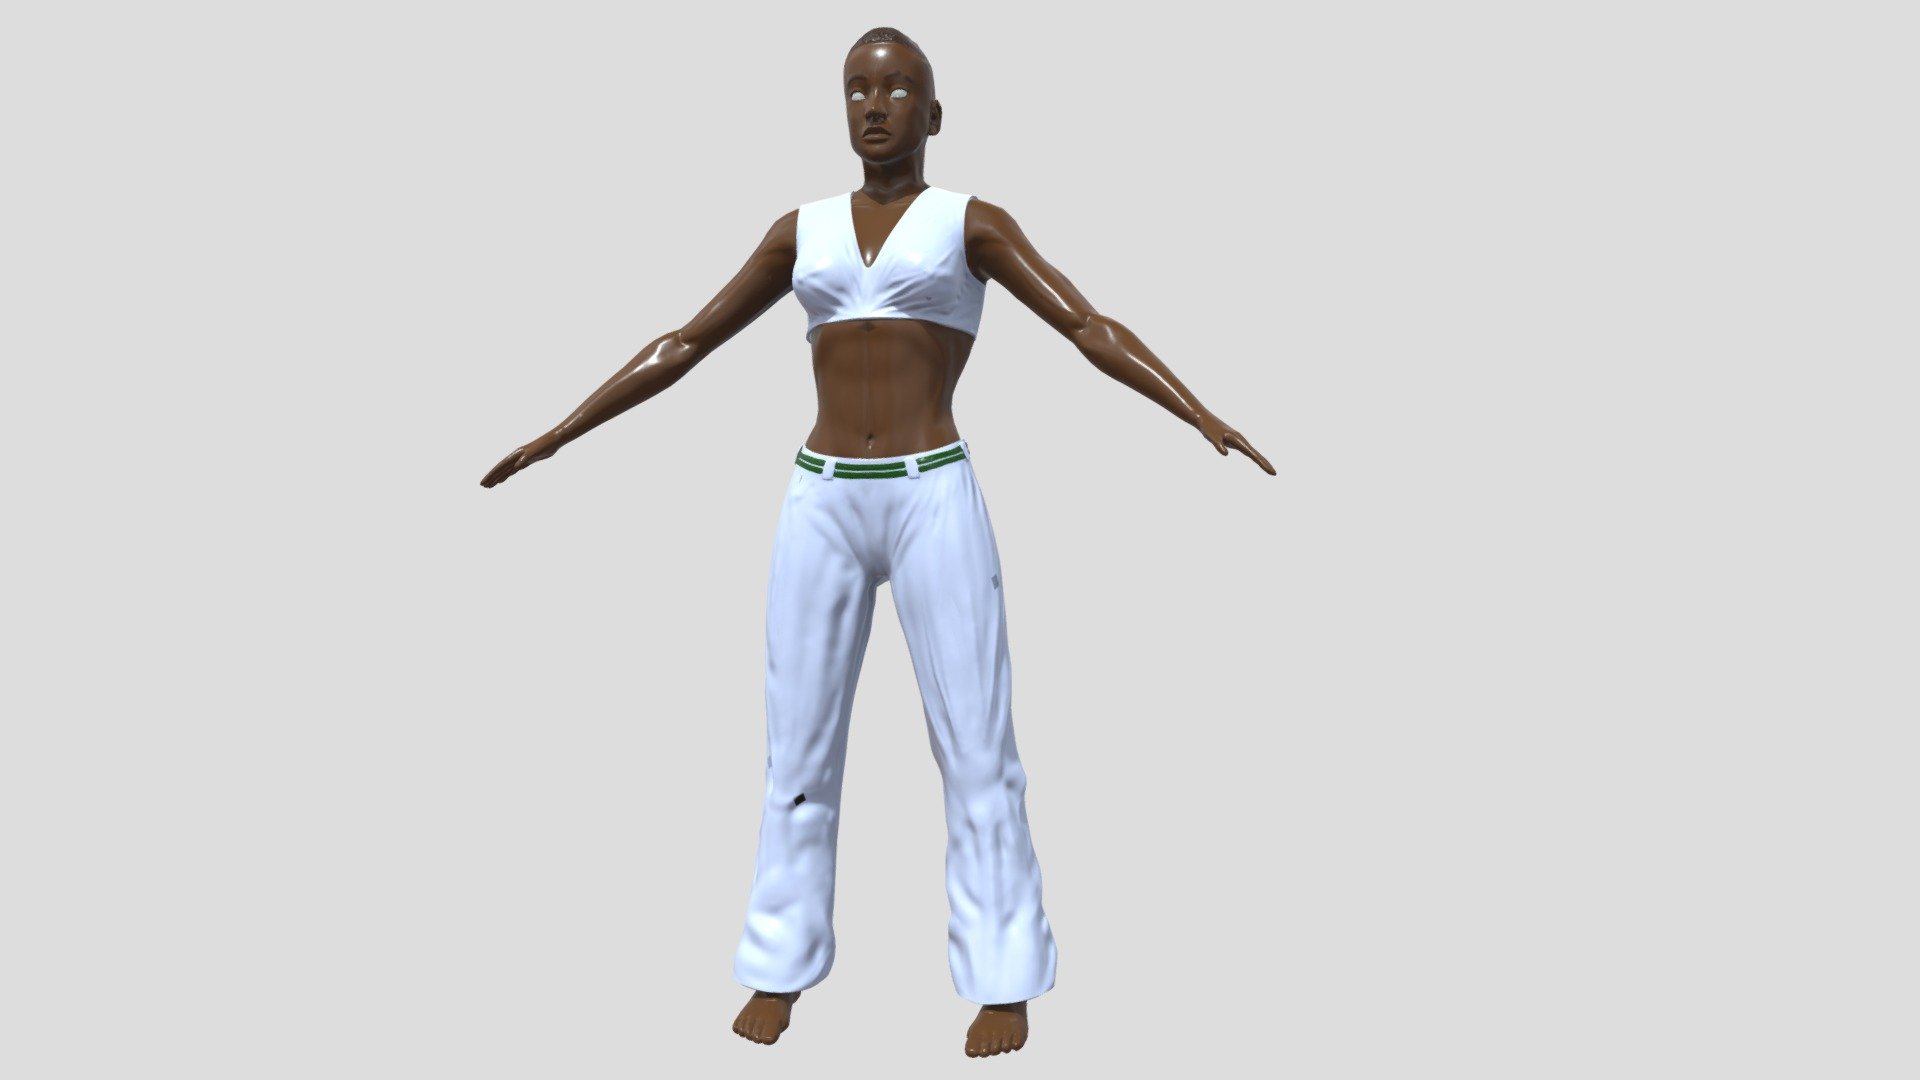 Working on a character model. Sculpting clothes on the model this time and not use Substance height maps 3d model